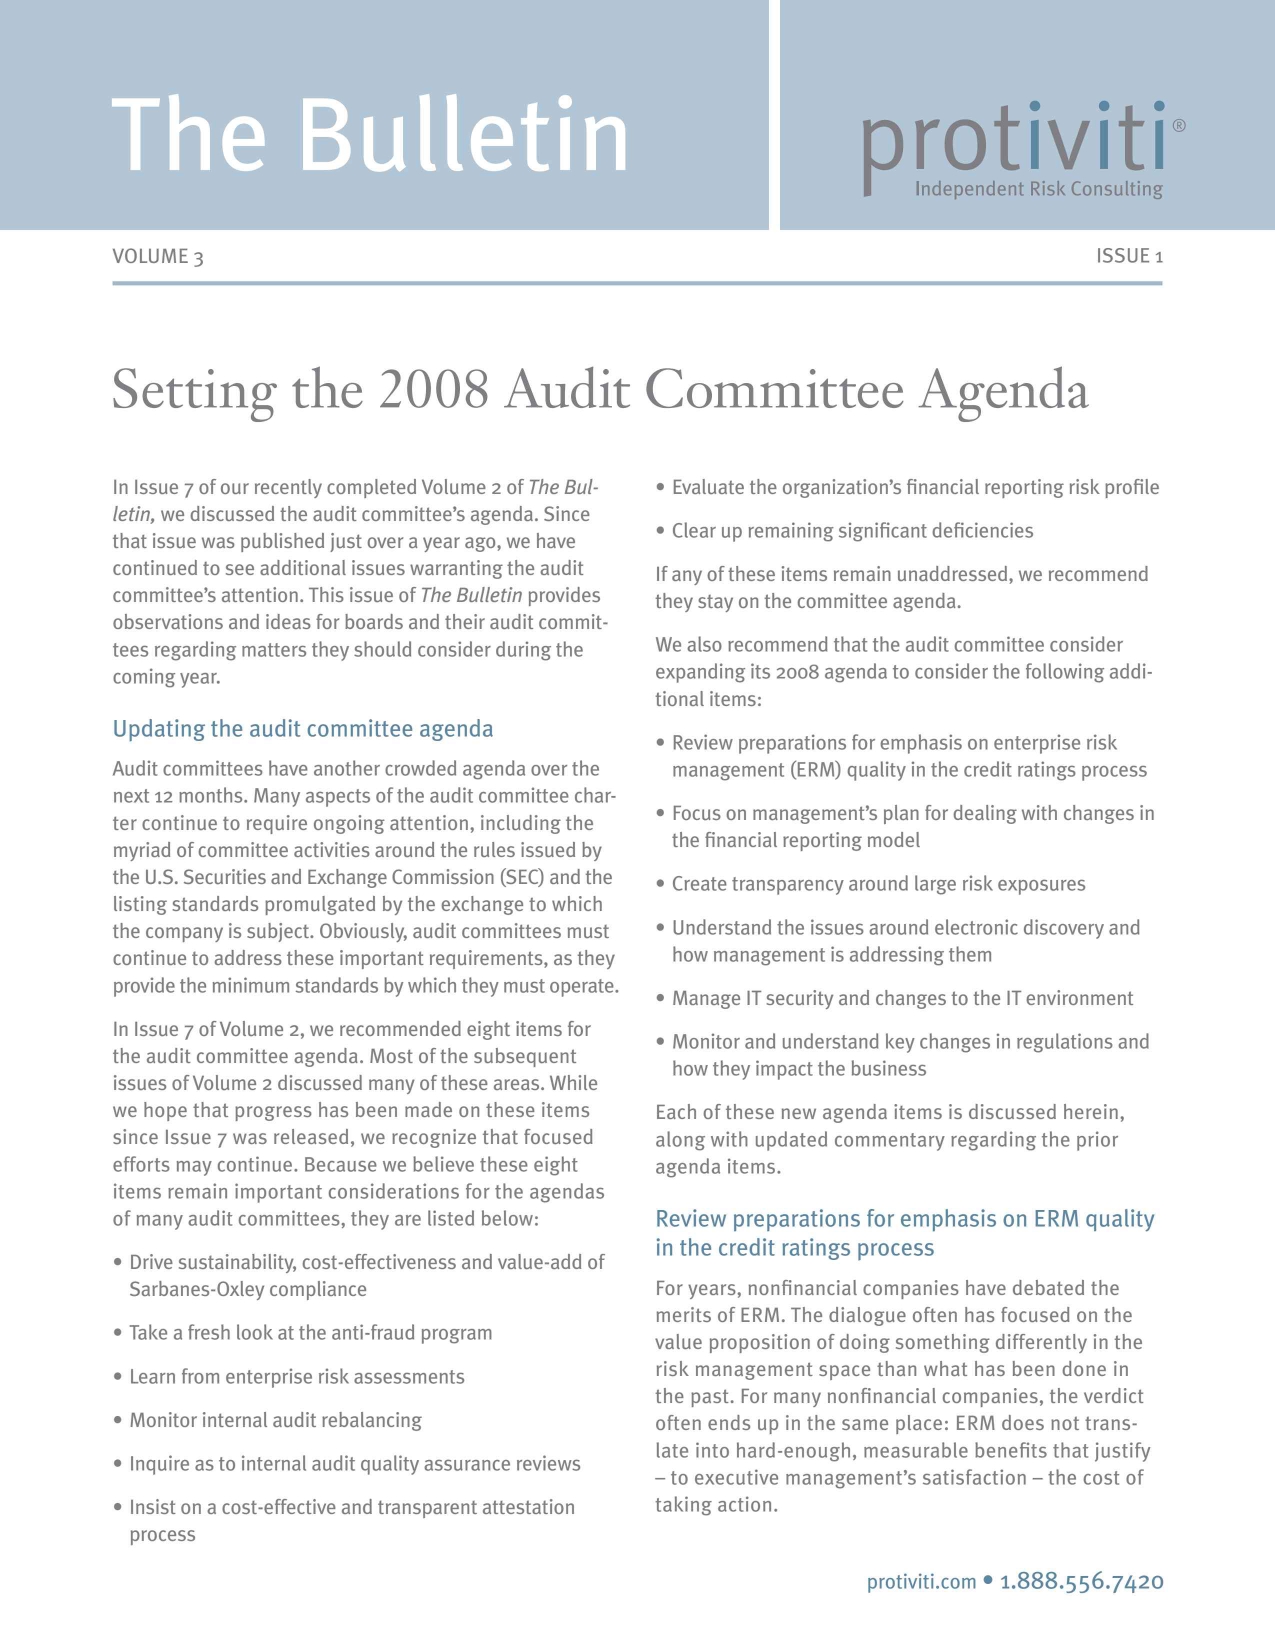 Screenshot of the first page of The Bulletin - Setting the 2008 Audit Committee Agenda